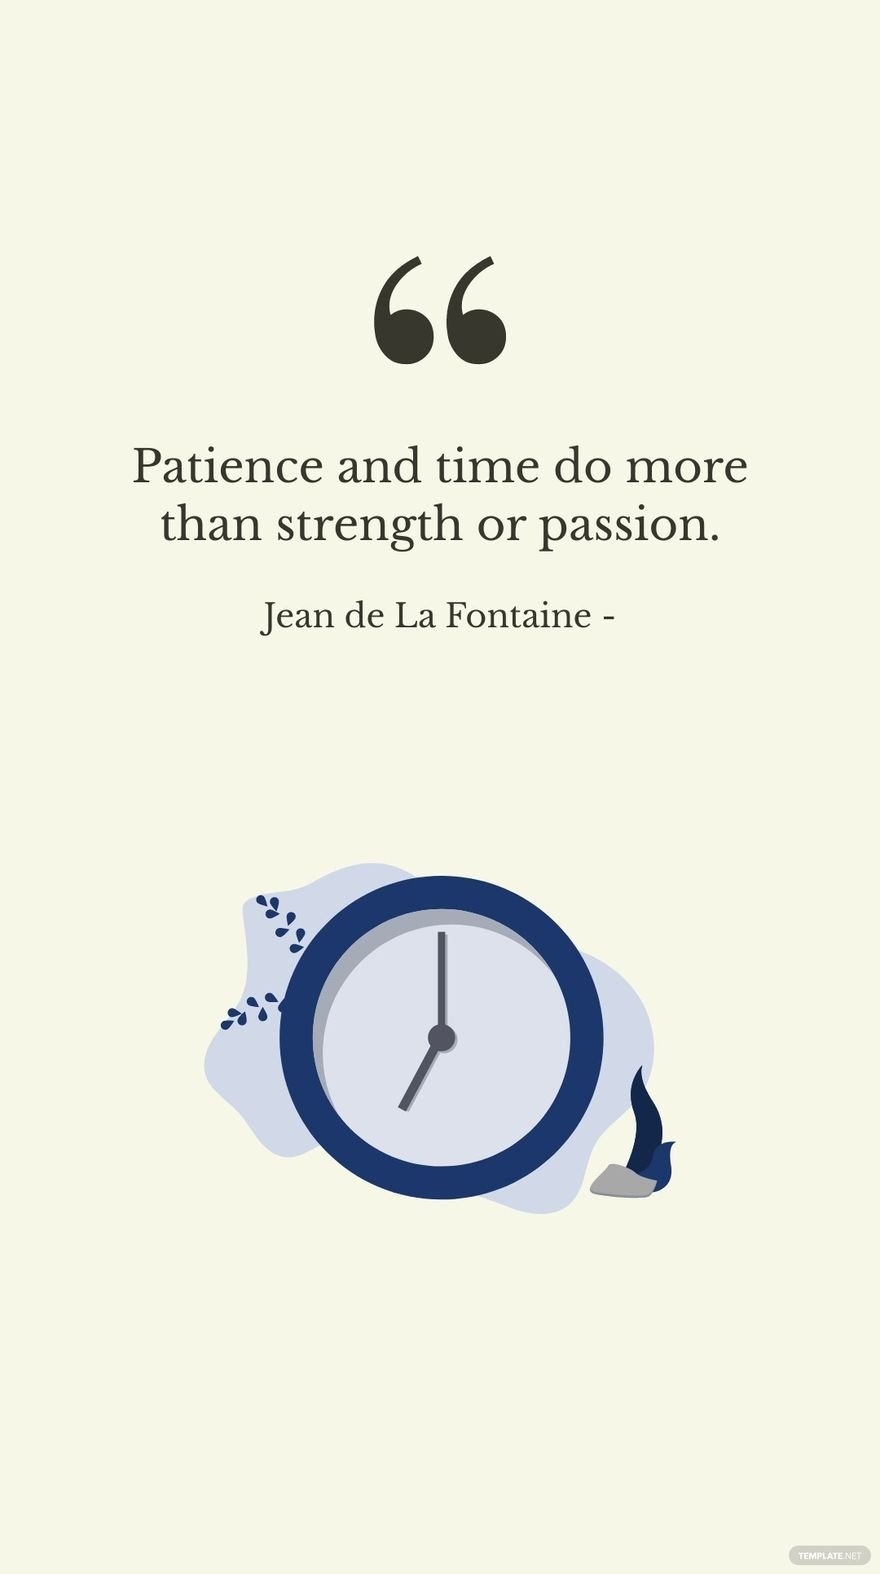 Free Jean de La Fontaine - Patience and time do more than strength or passion. in JPG